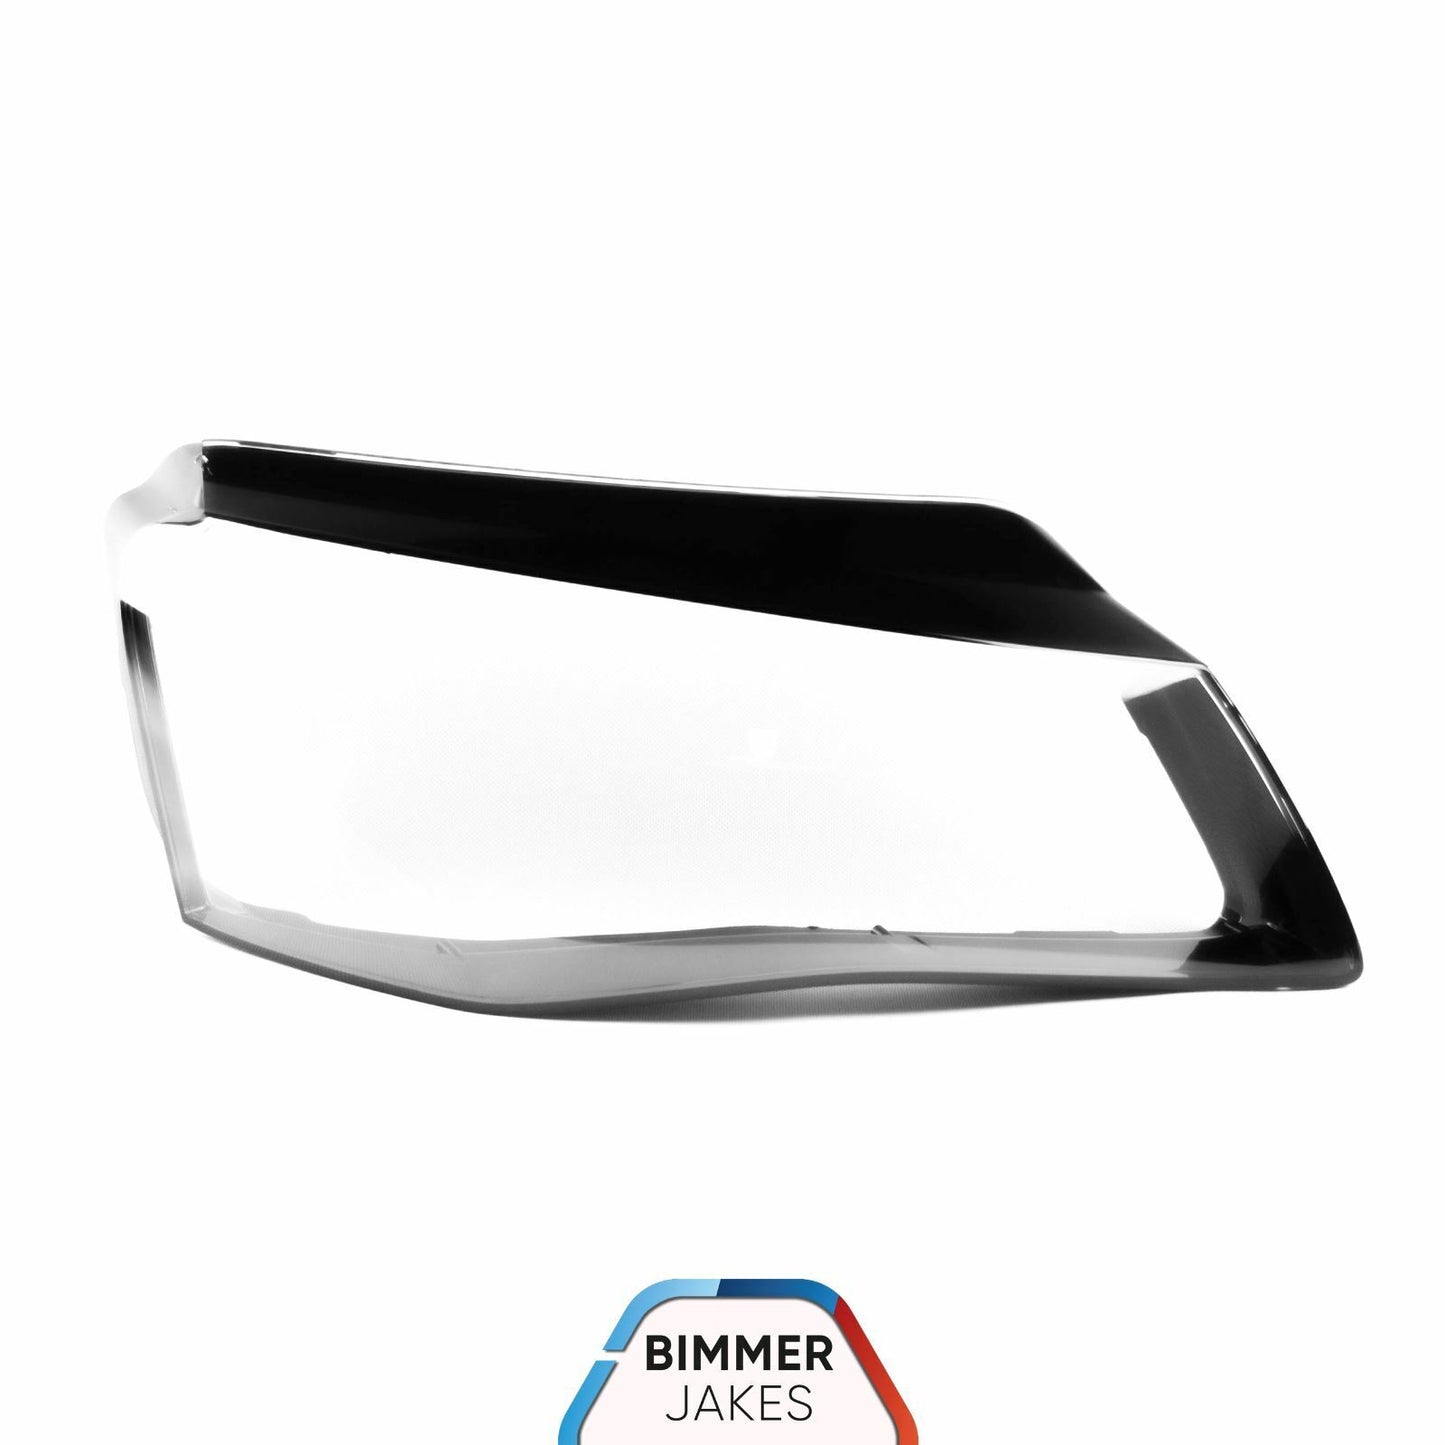 Headlight Lens covers for Audi A8 D4 (2011-2013)